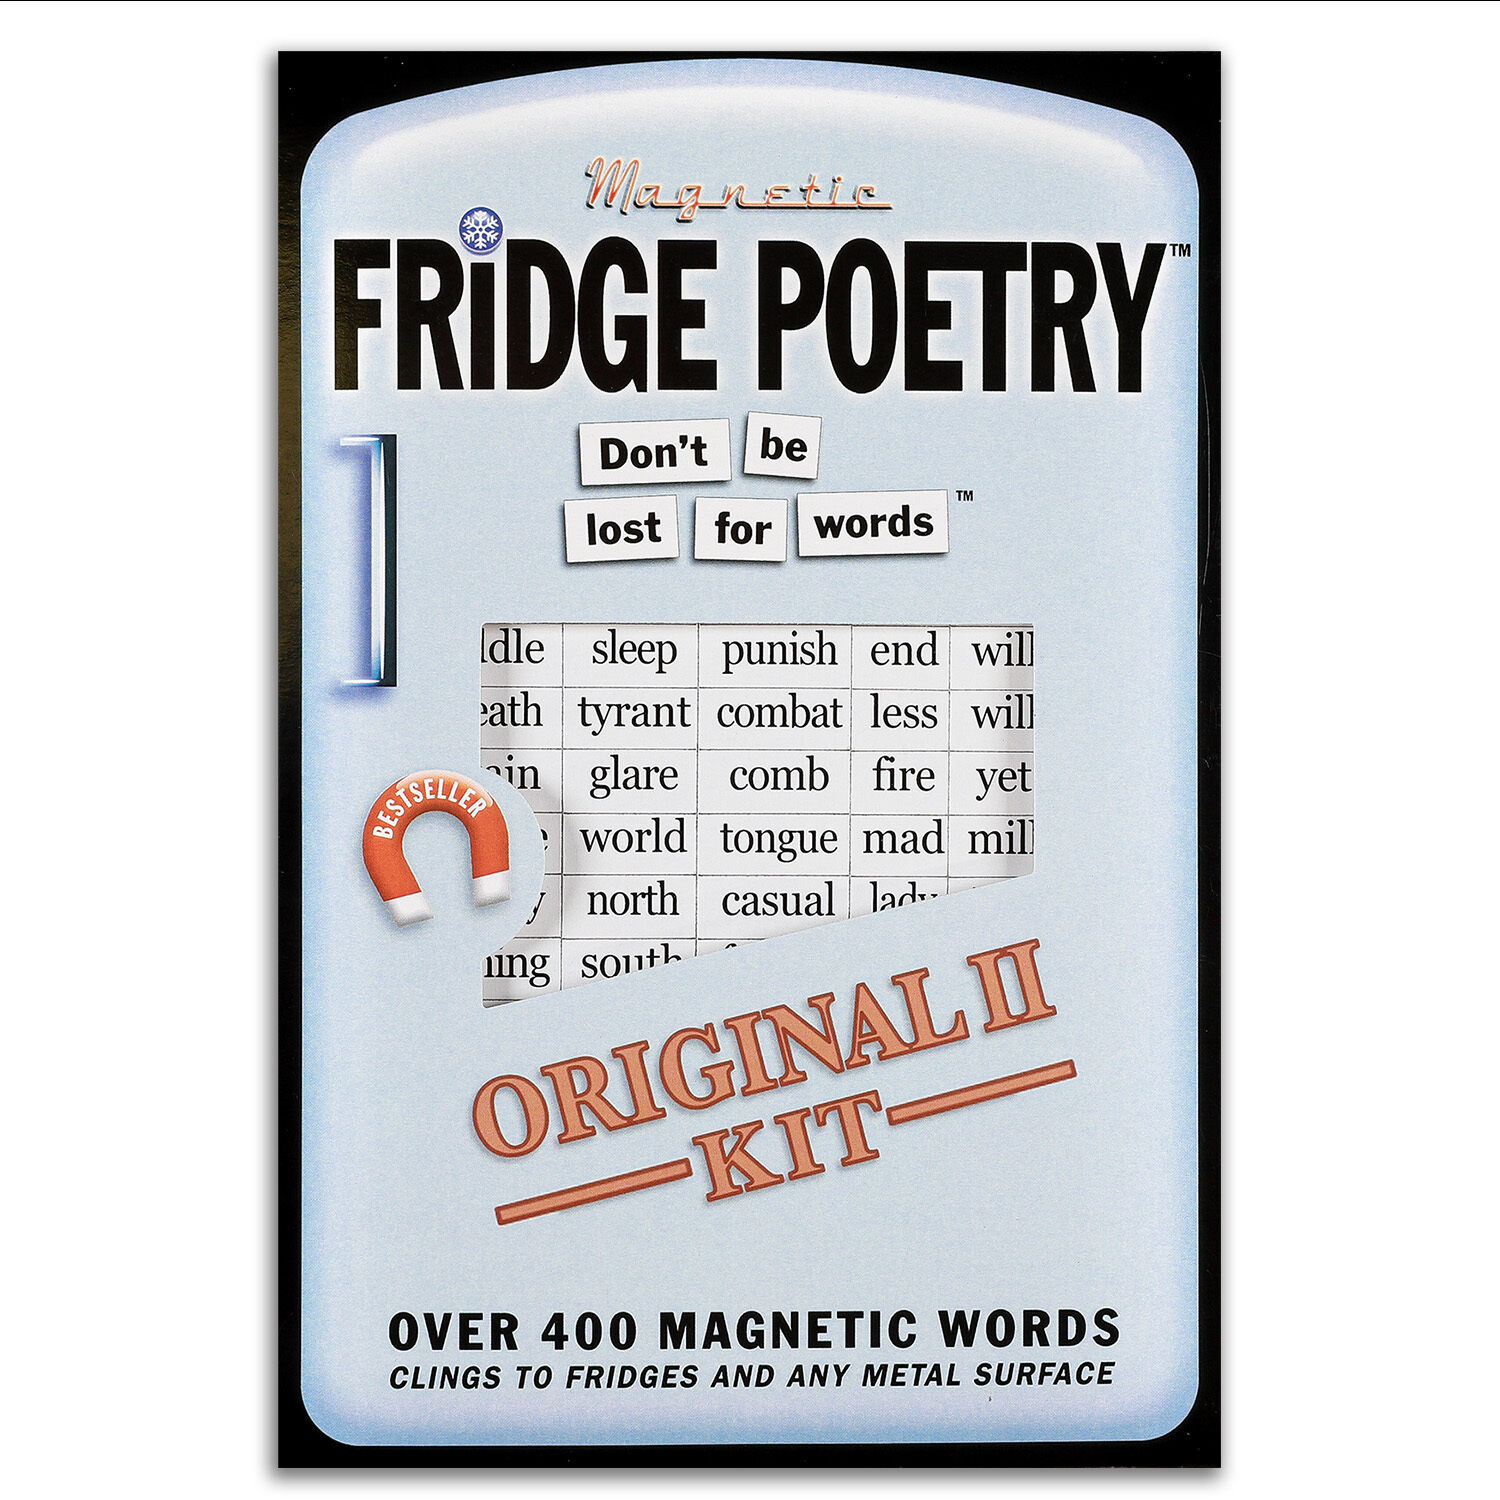 Refrigerator Poetry Word Magnets Office Space Poetry Magnet Set 